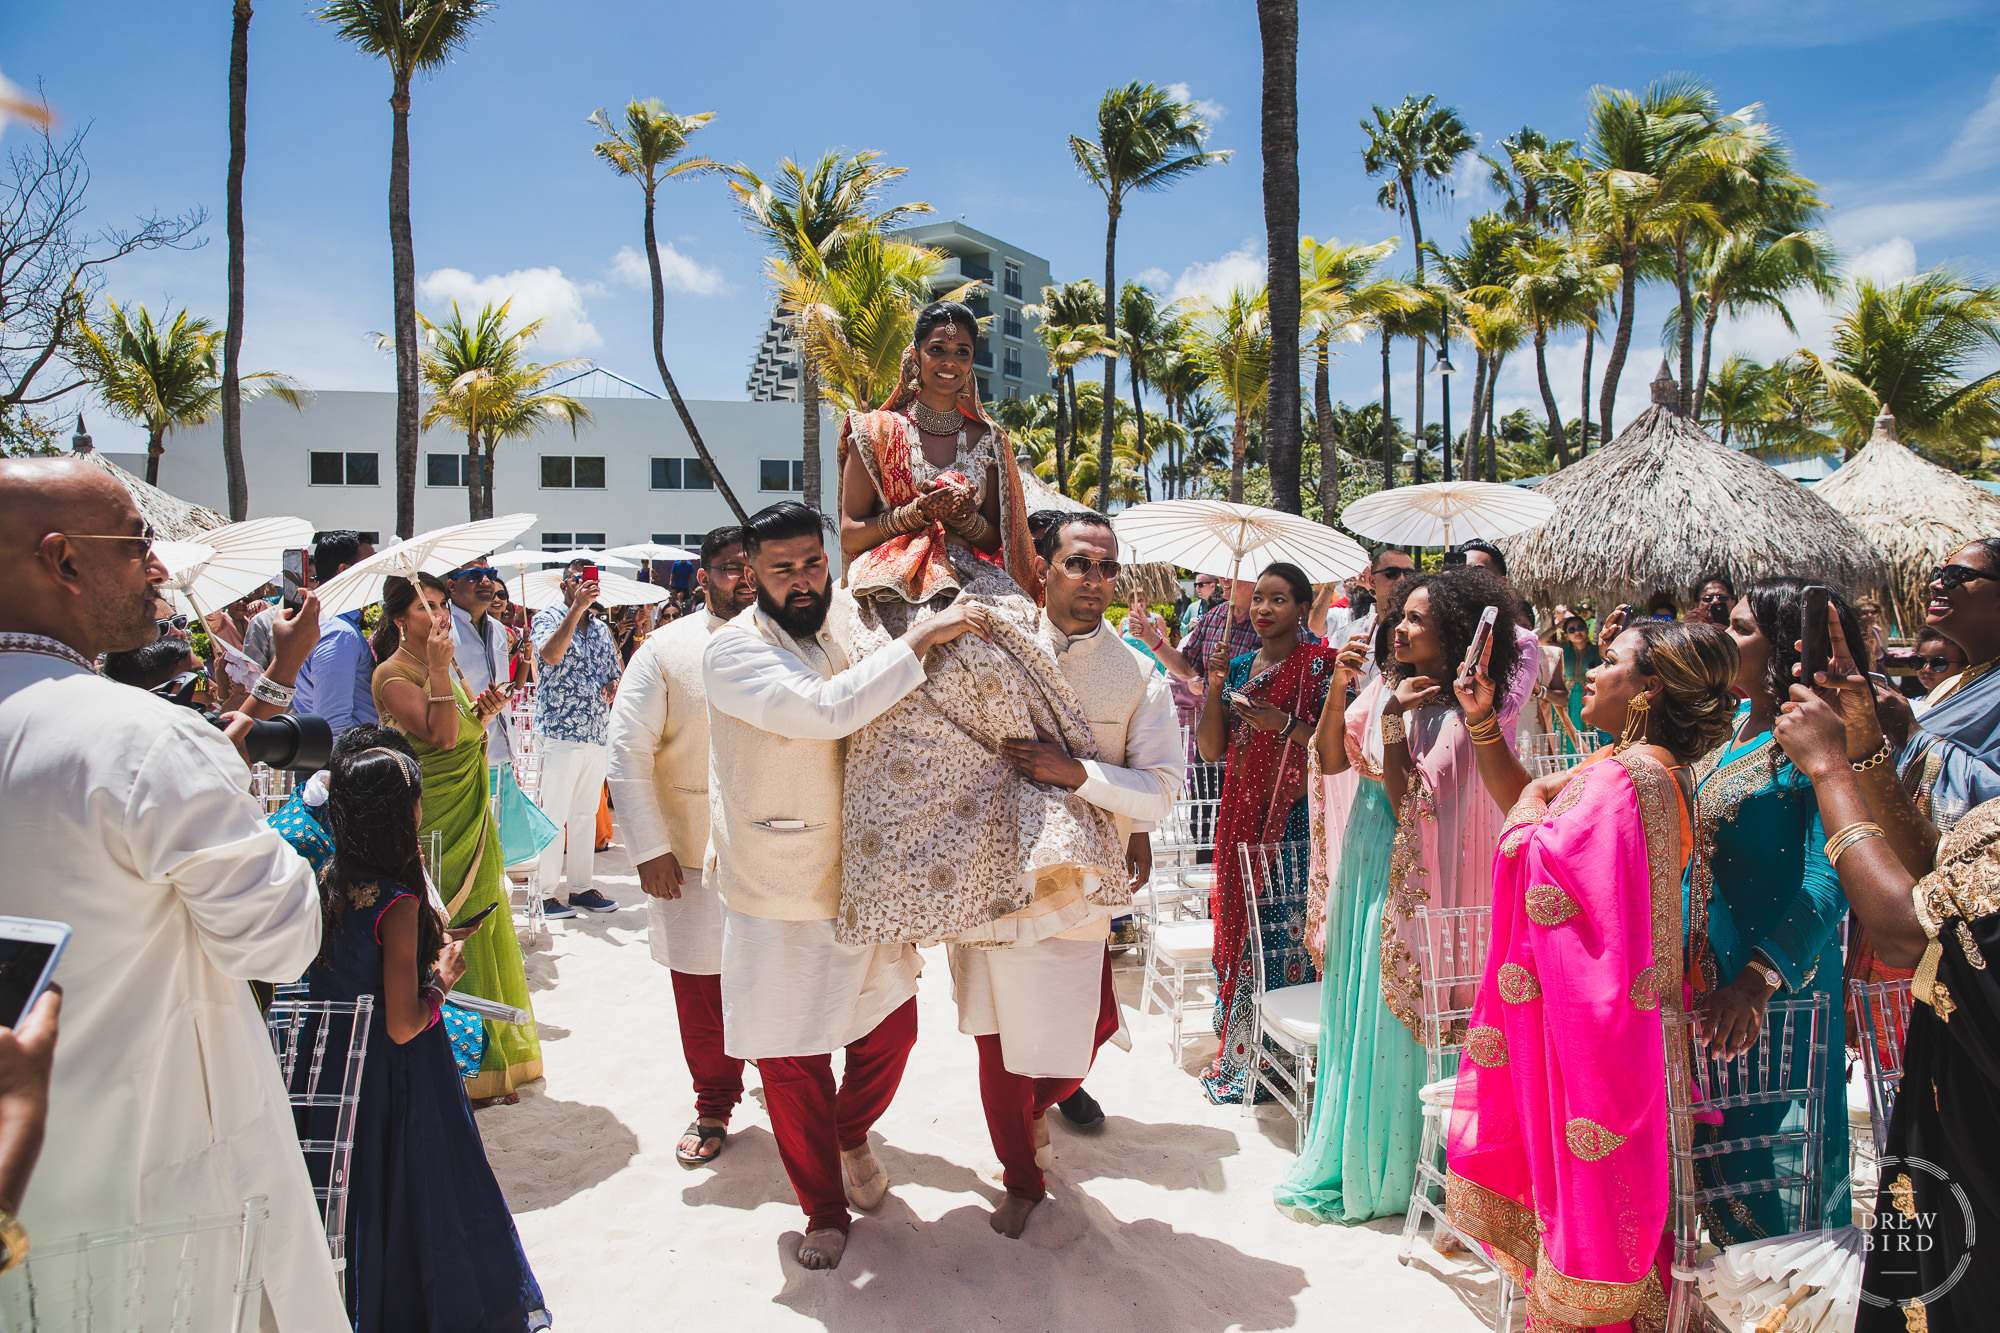 An Indian bride in her traditional Hindu wedding dress is carried on the shoulders of her family to the Mandap at the beginning of the wedding ceremony on the beach at the tropical Hilton Aruba resort in the Caribbean by Indian wedding photographer, Drew Bird.